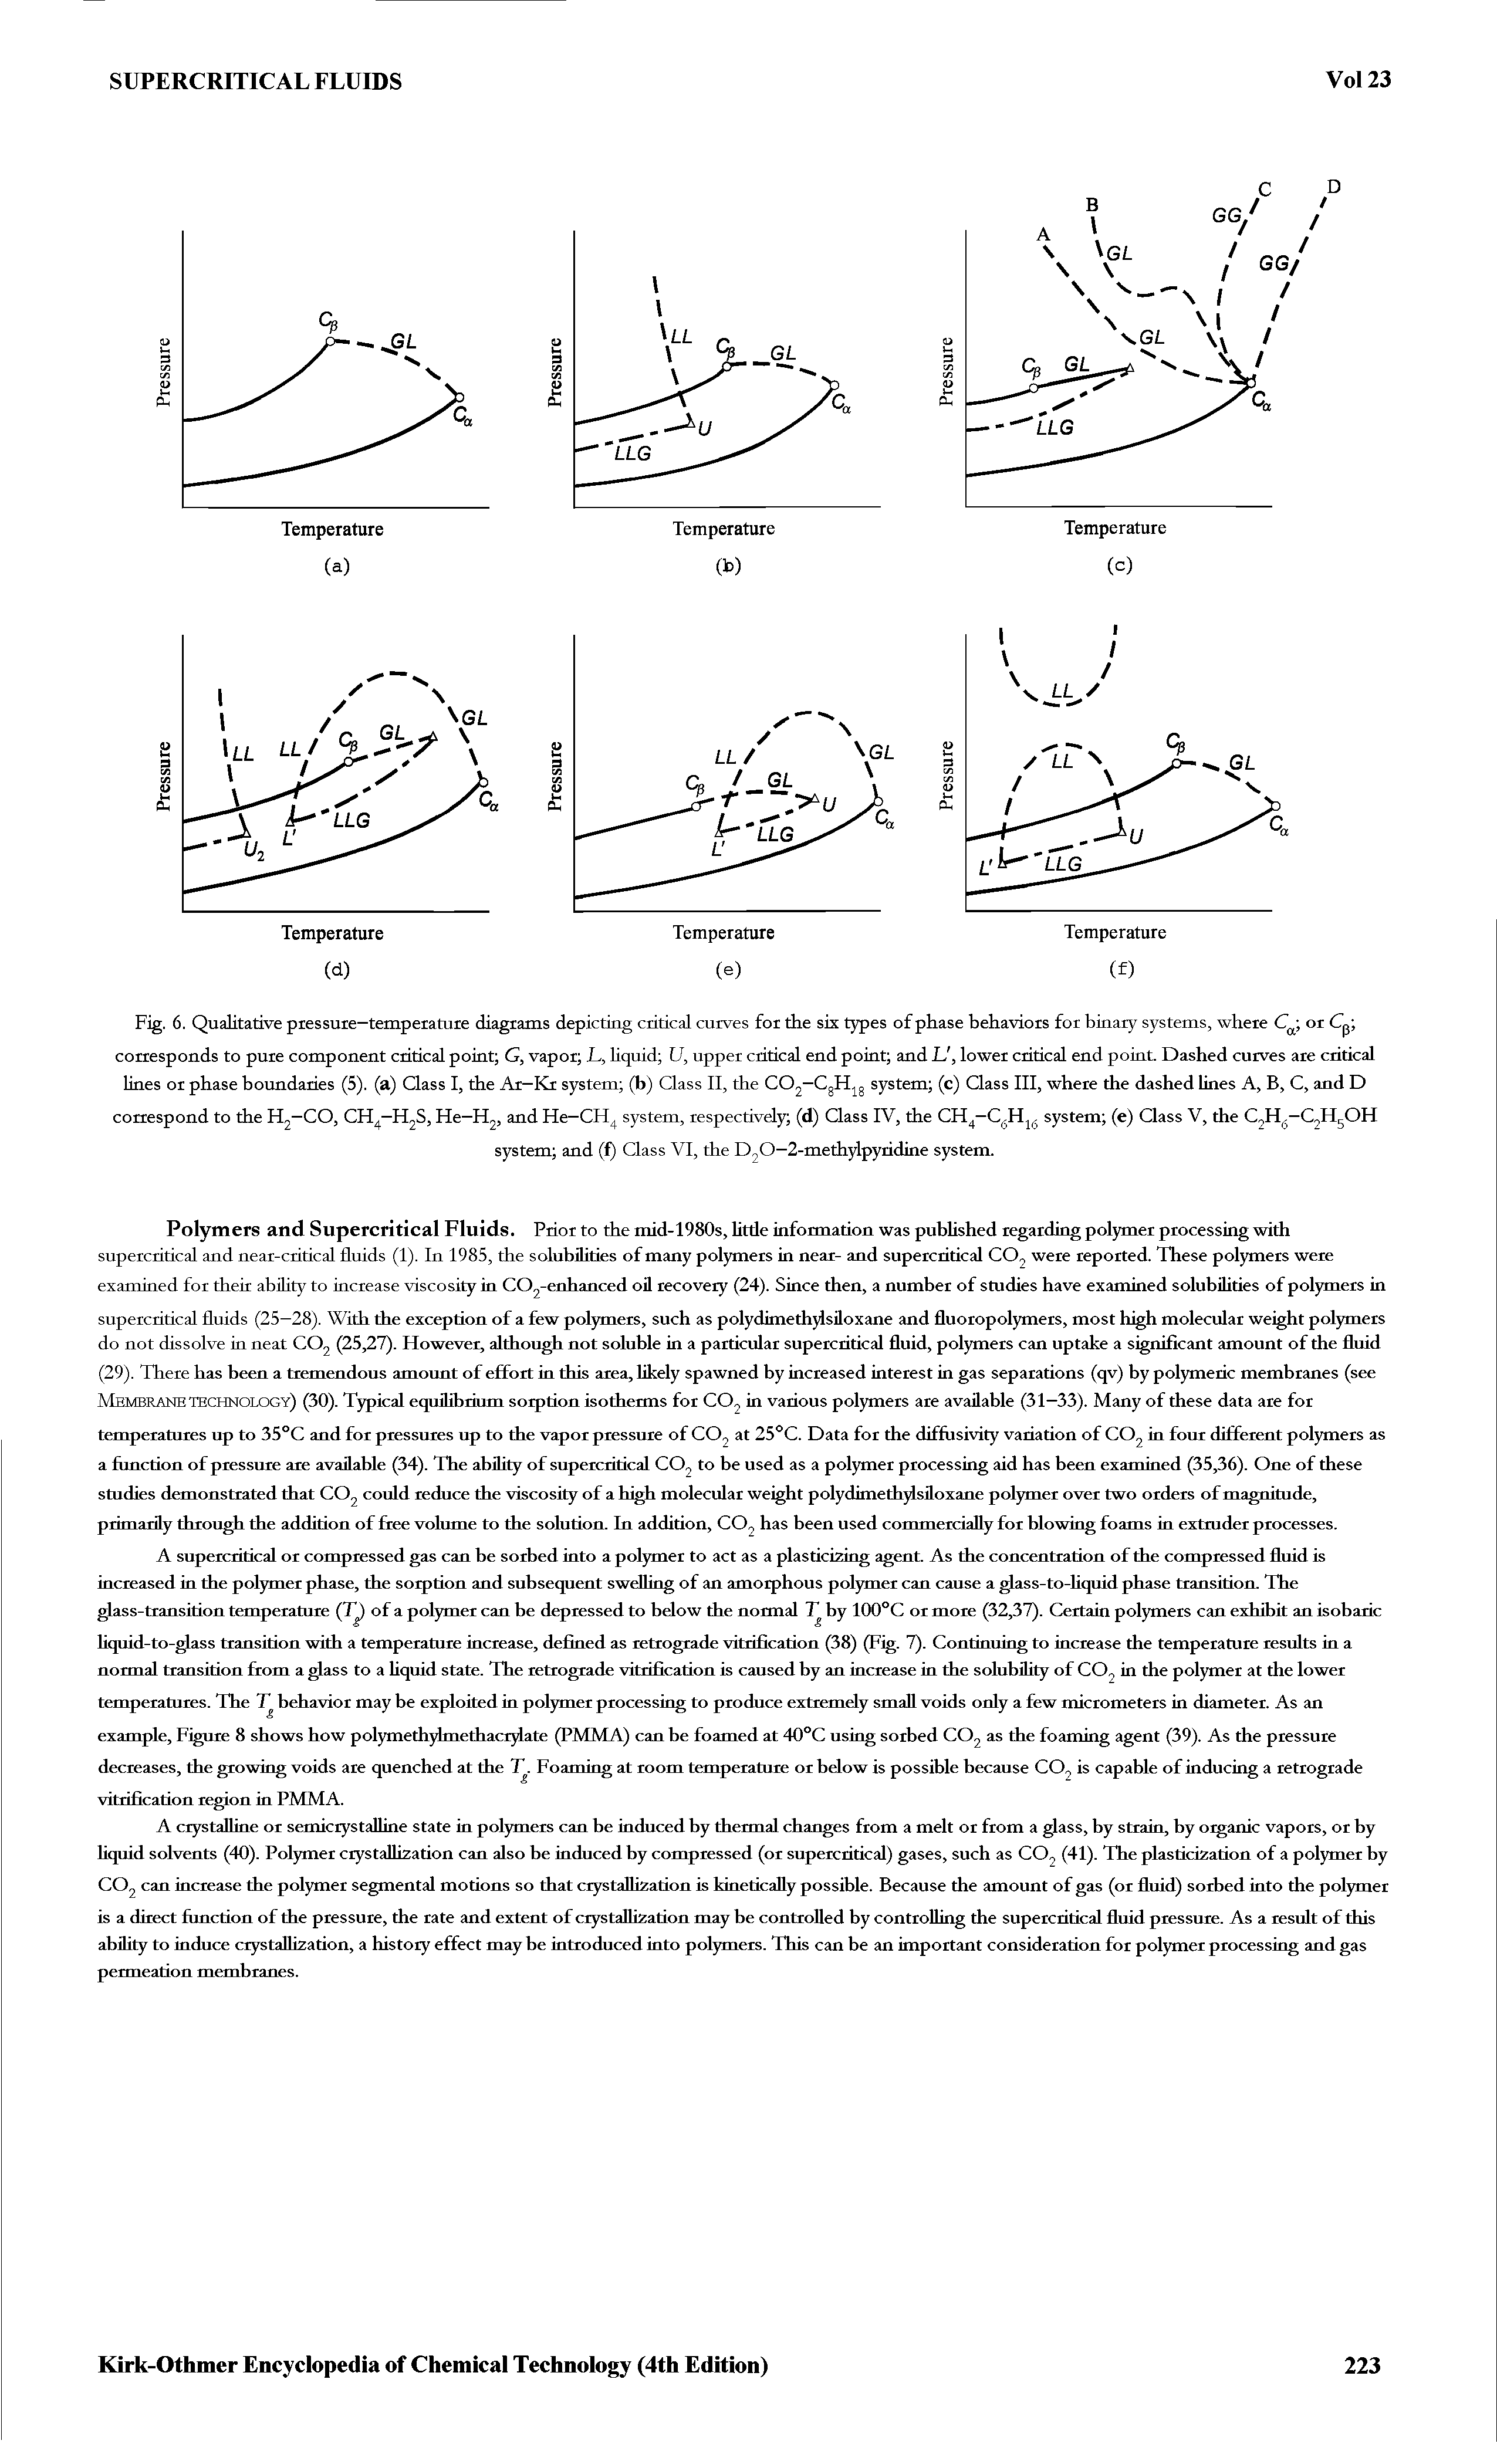 Fig. 6. Qualitative pressure—temperature diagrams depicting critical curves for the six types of phase behaviors for binary systems, where Ca or C corresponds to pure component critical point G, vapor L-, liquid U, upper critical end point and U, lower critical end point. Dashed curves are critical lines or phase boundaries (5). (a) Class I, the Ar—Kr system (b) Class II, the C02—C8H18 system (c) Class III, where the dashed lines A, B, C, and D correspond to the H2-CO, CH4-H2S, He-H2, and He-CH4 system, respectively (d) Class IV, the CH4 C6H16 system (e) Class V, the C2H6 C2H5OH...